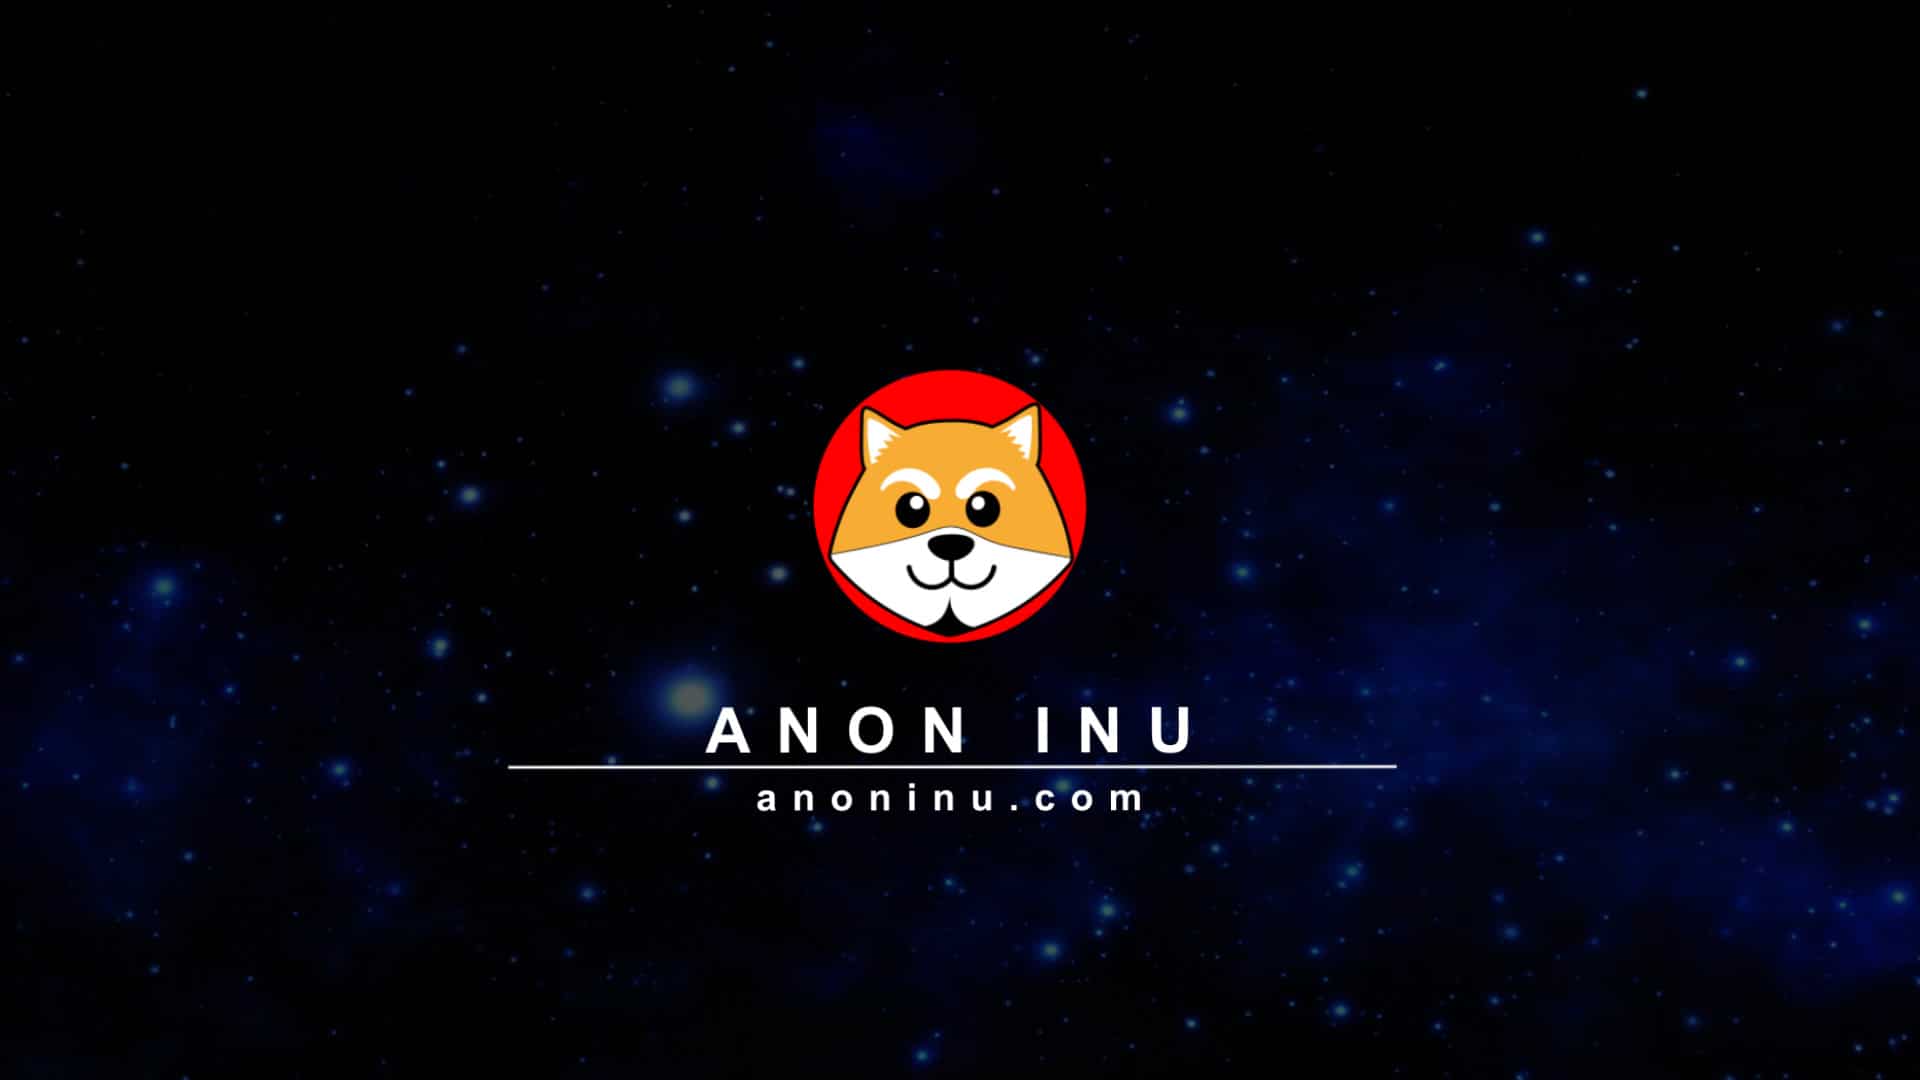 Anon Inu, even Anonymous has its own token